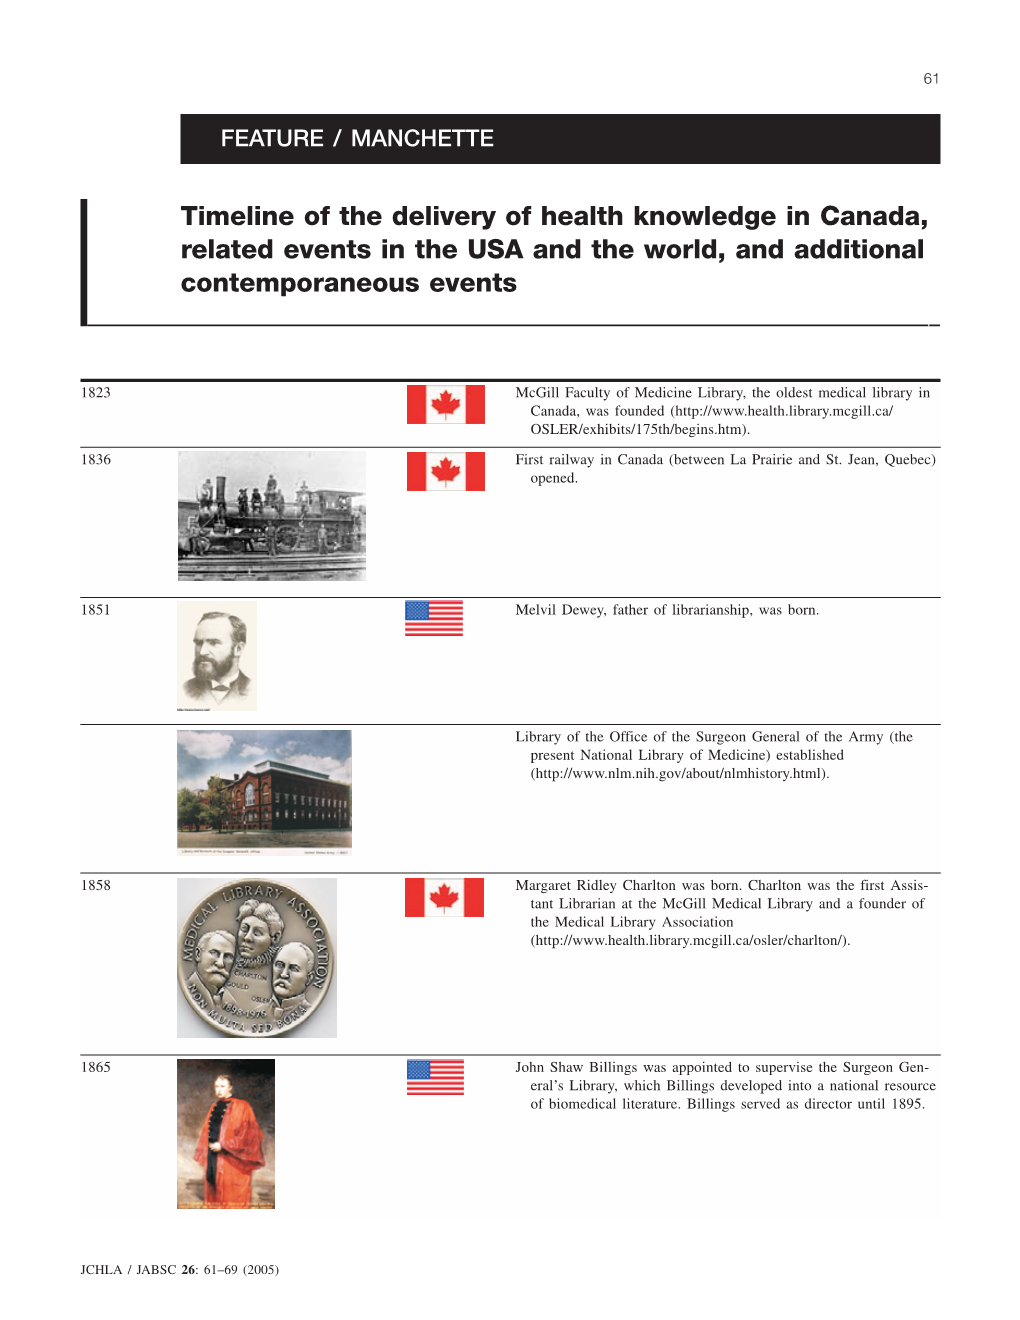 Timeline of the Delivery of Health Knowledge in Canada, Related Events in the USA and the World, and Additional Contemporaneous Events Ellis